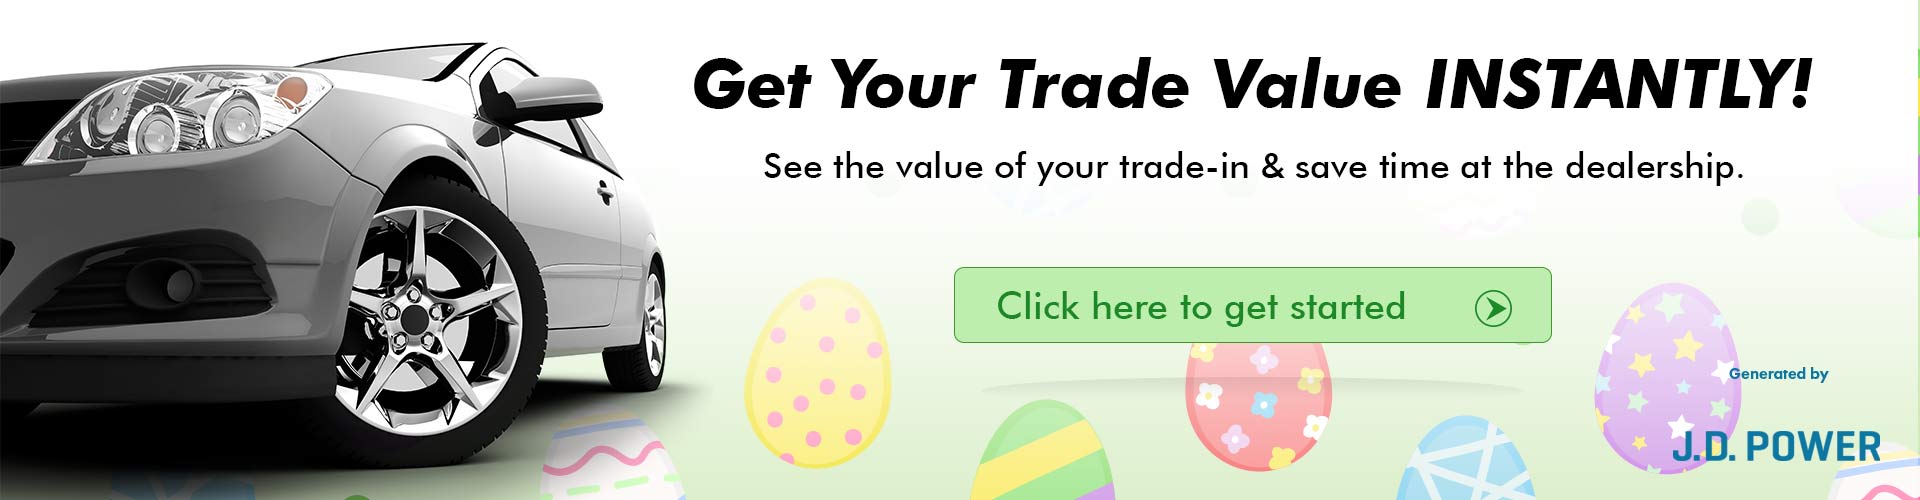 Value Your Trade - Easter